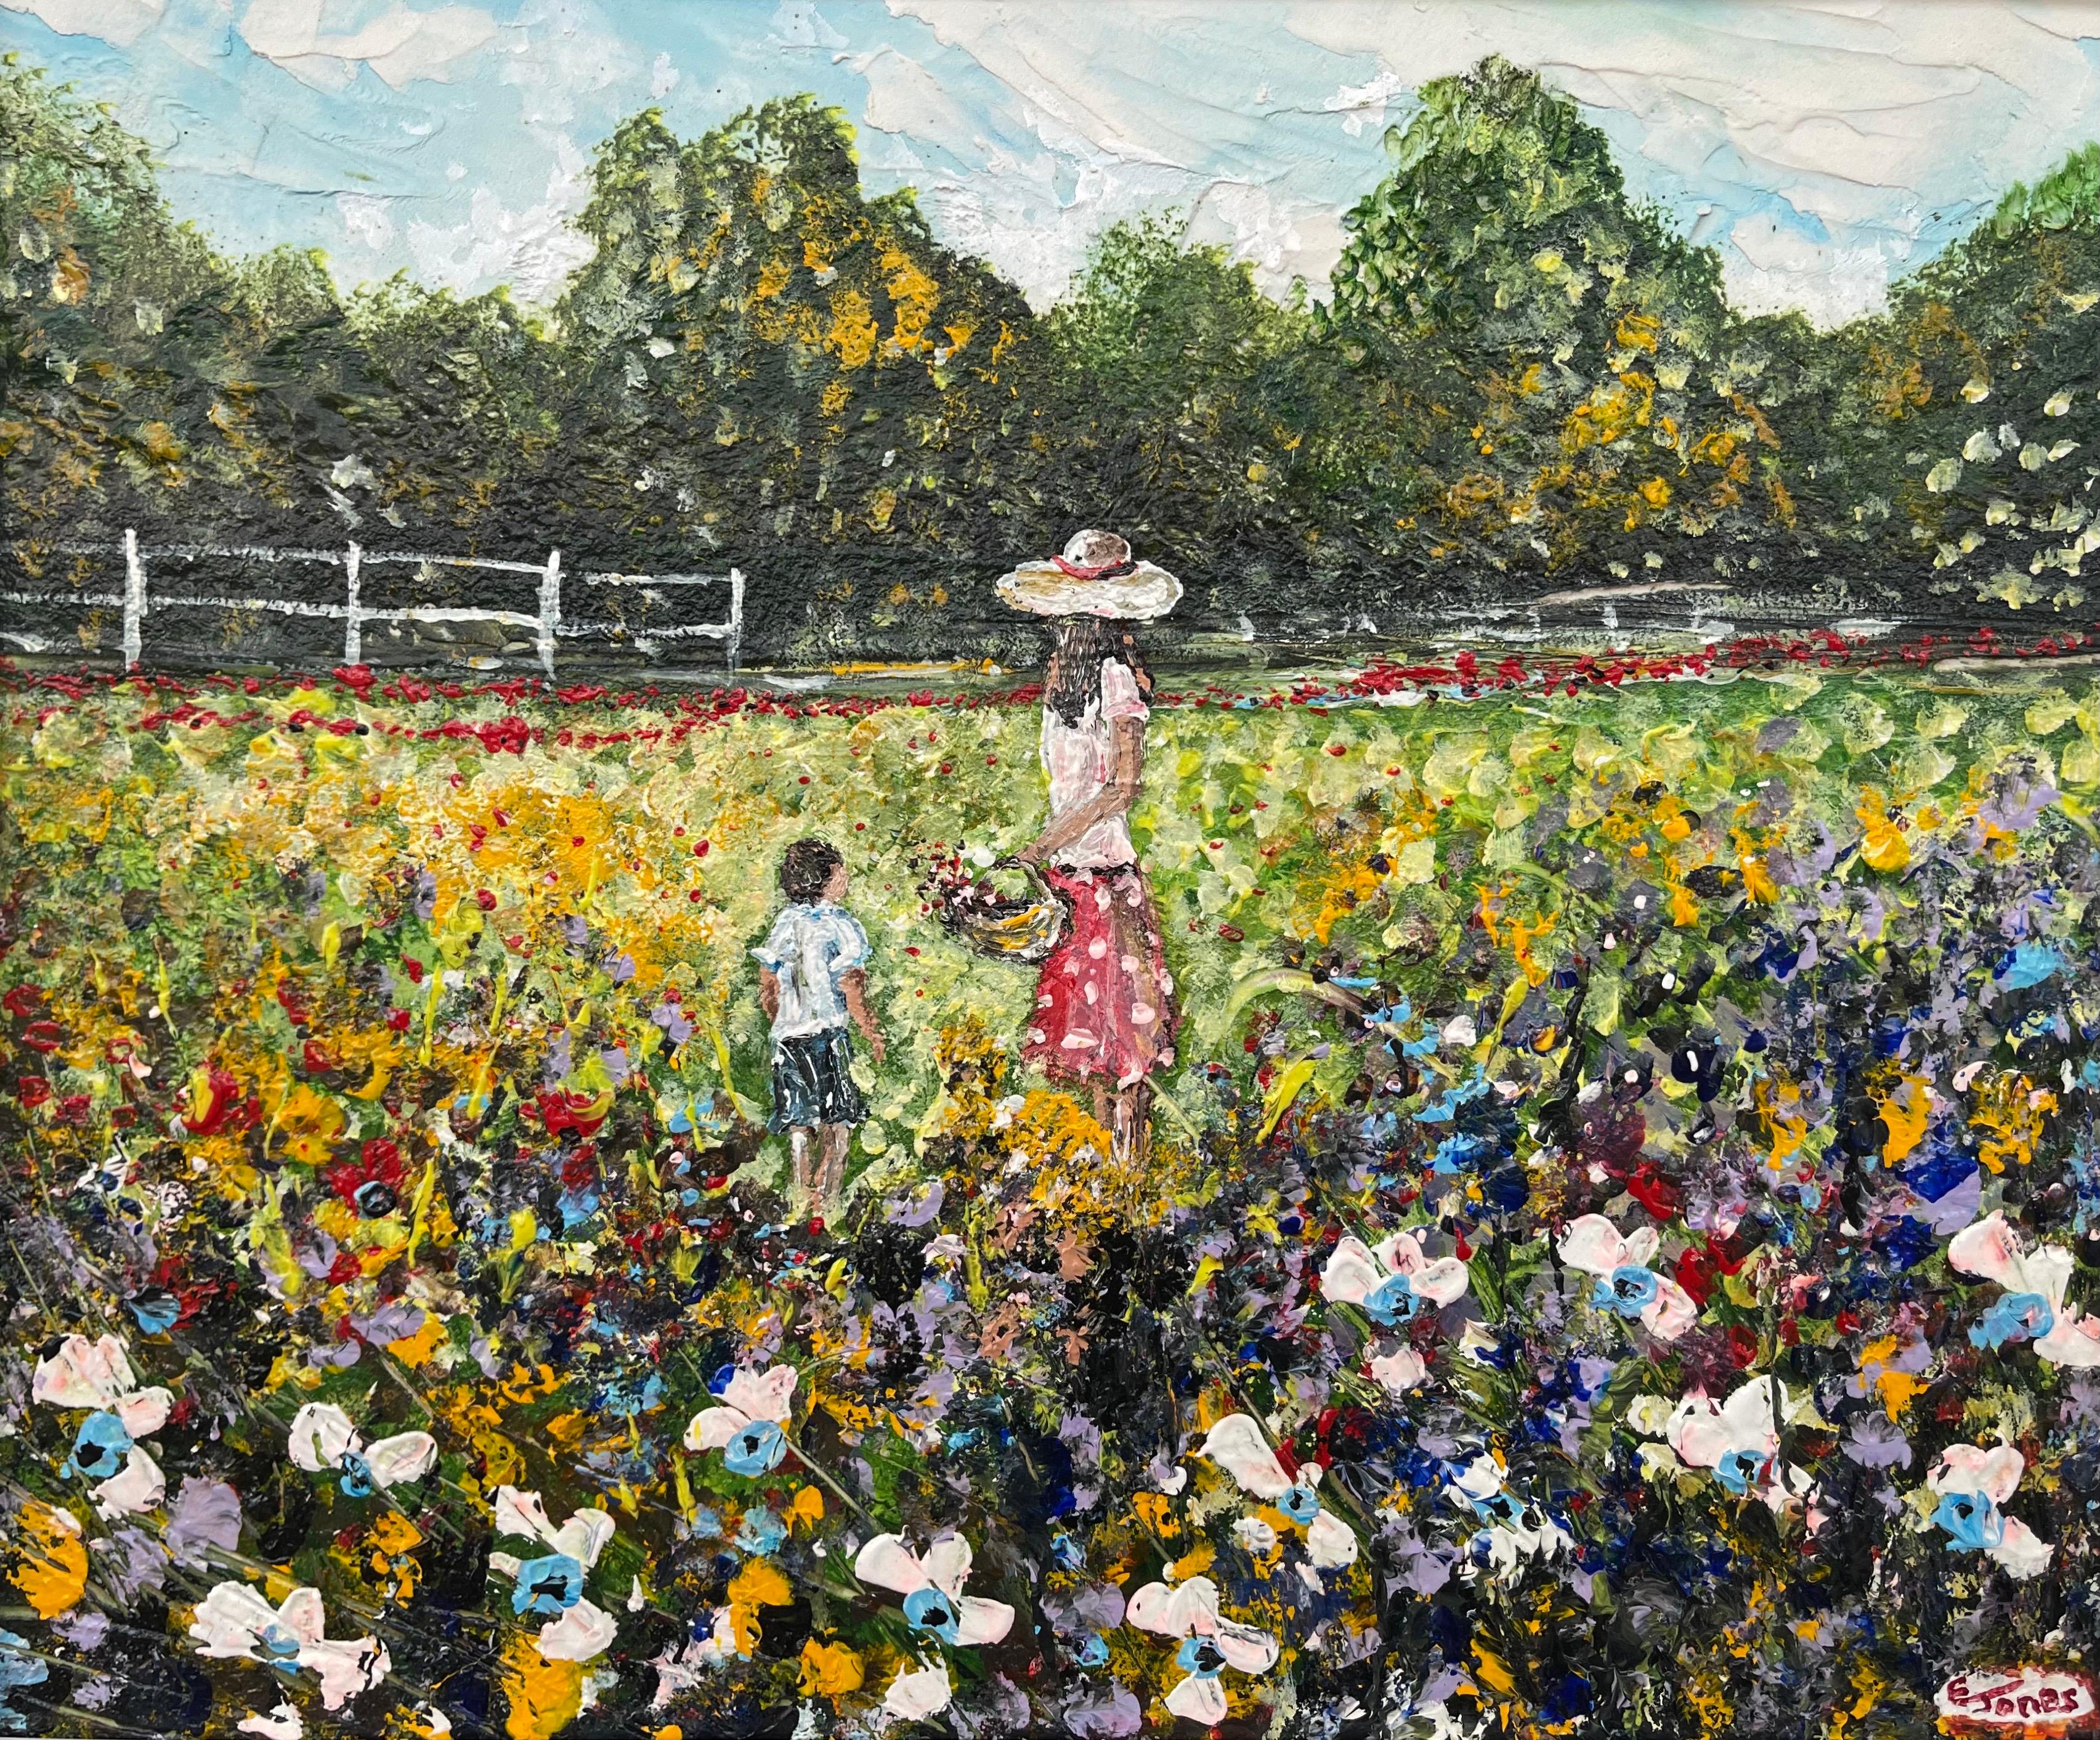 Painting of Mother & Child gathering Wild Flowers by Irish Contemporary Artist - Black Figurative Painting by Emma Jones